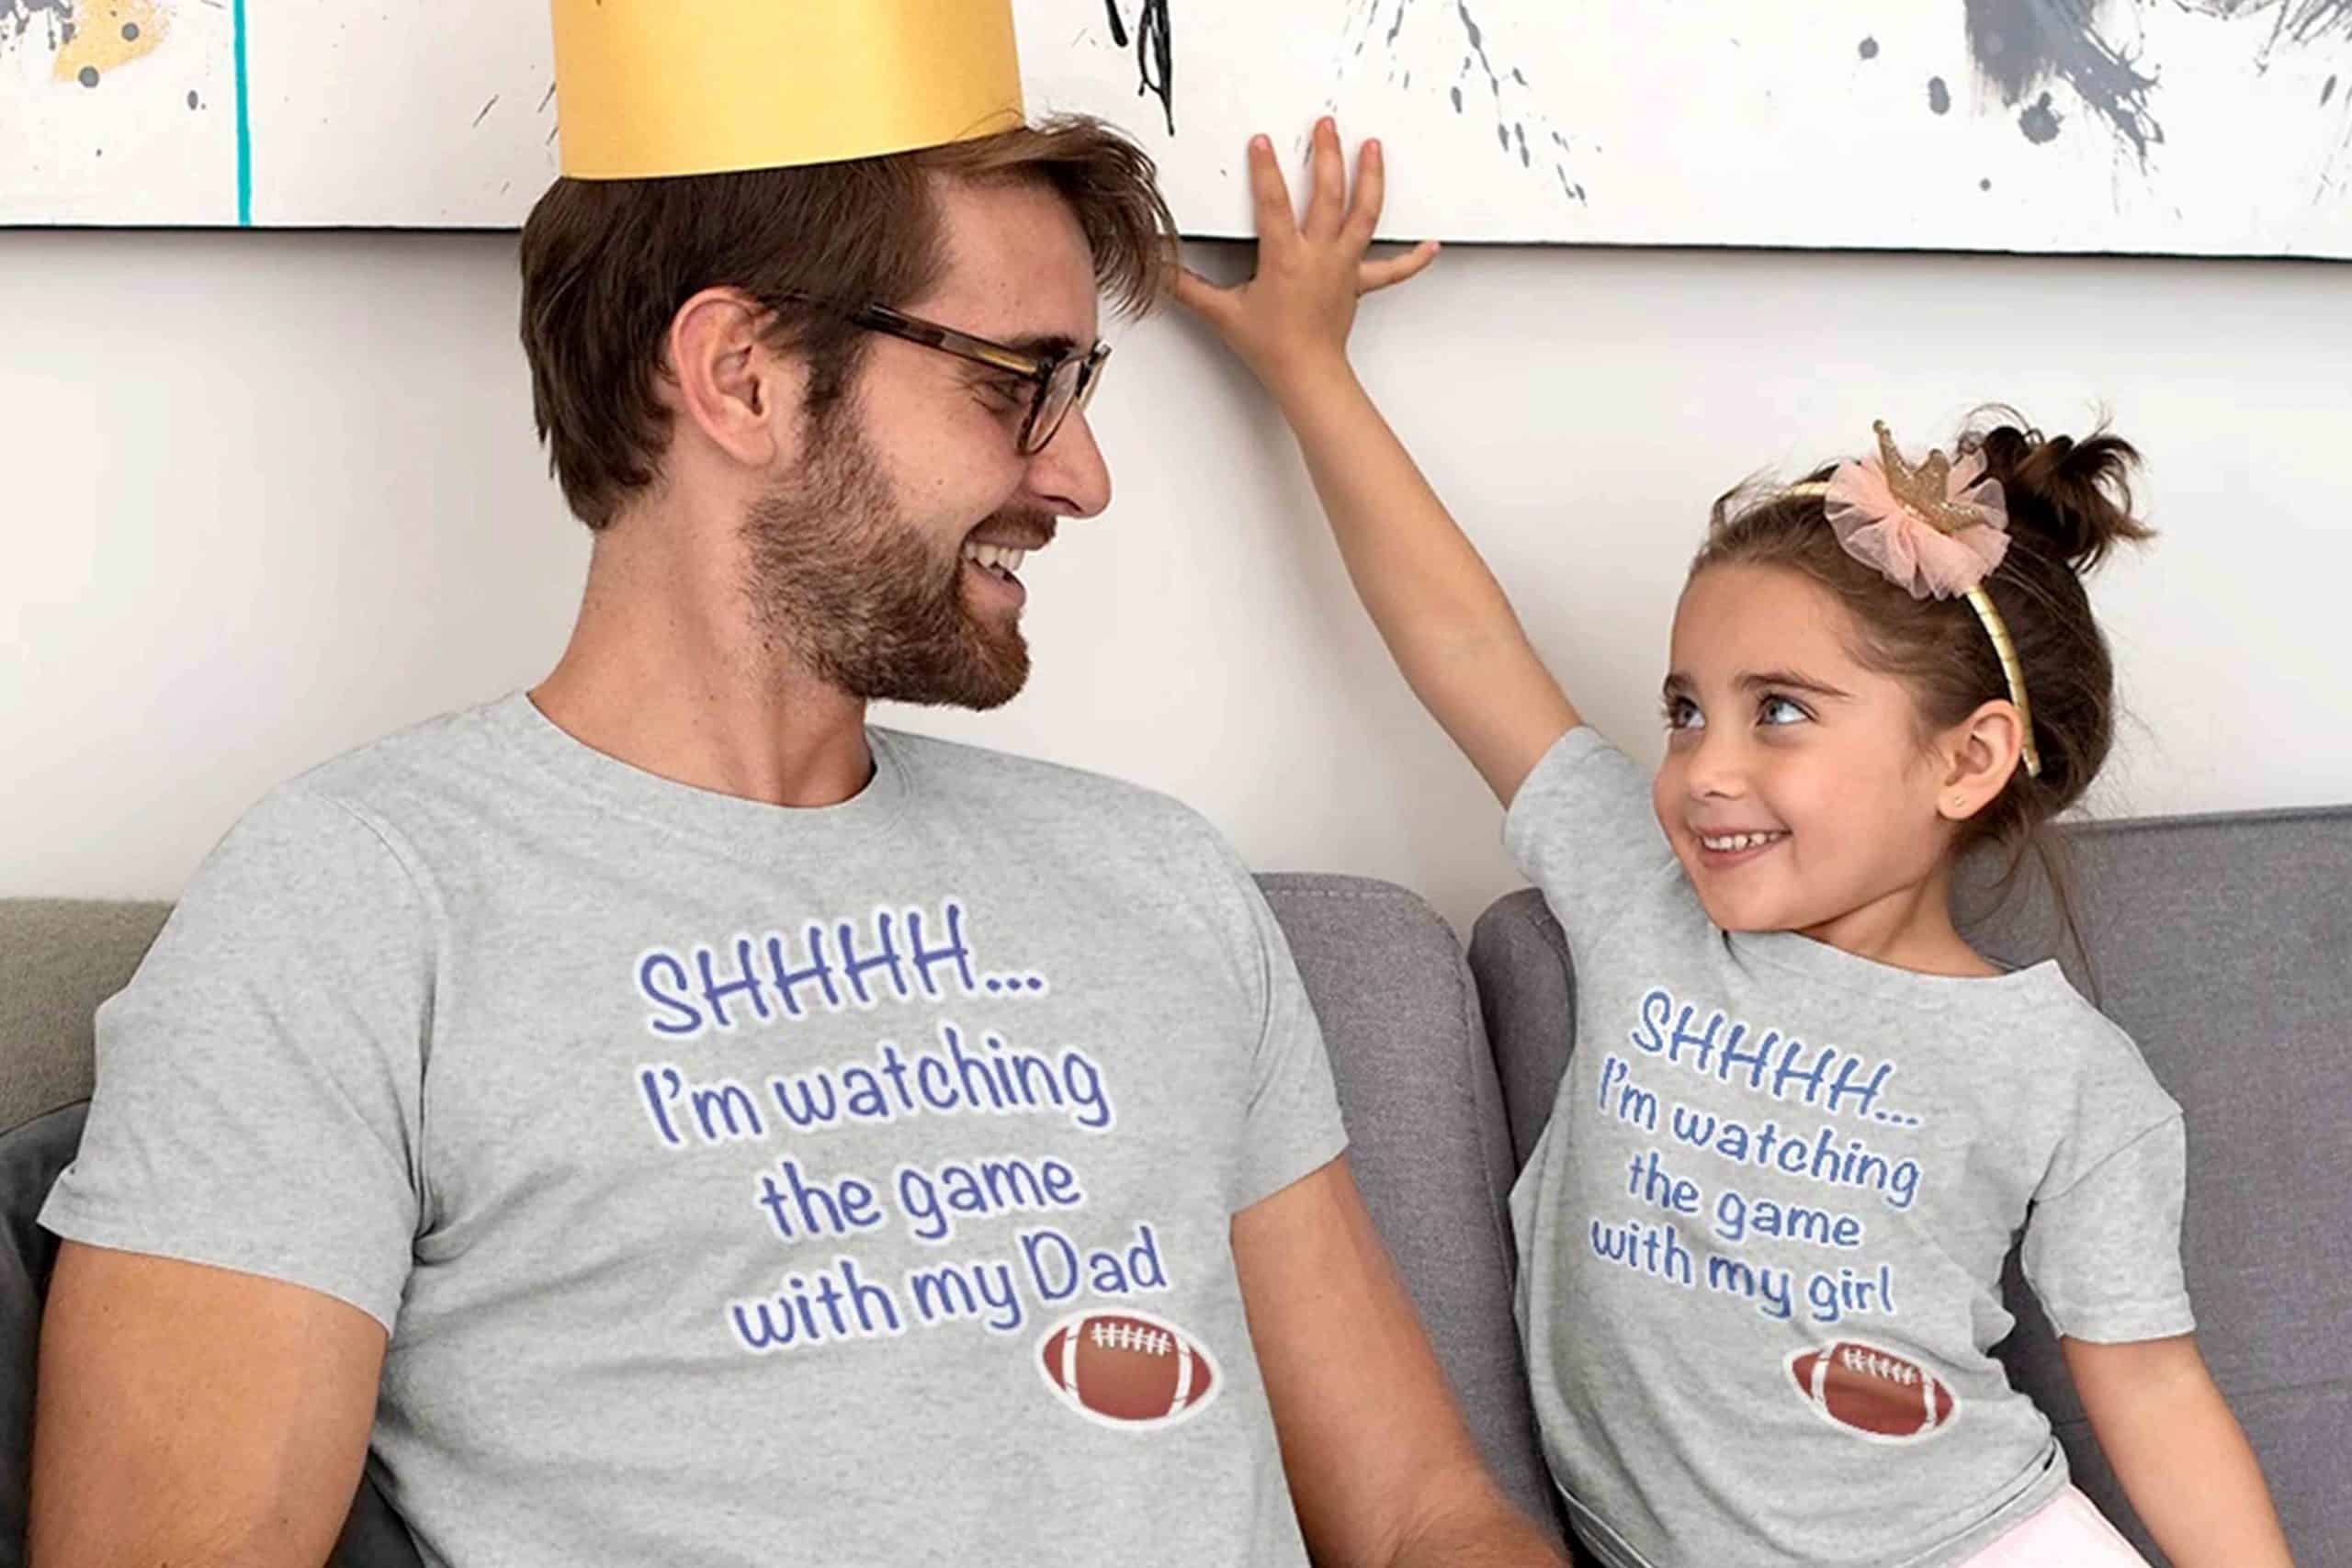 Unique & Adorable Fashion Trends to Sync in Dynamic Ways for the Family